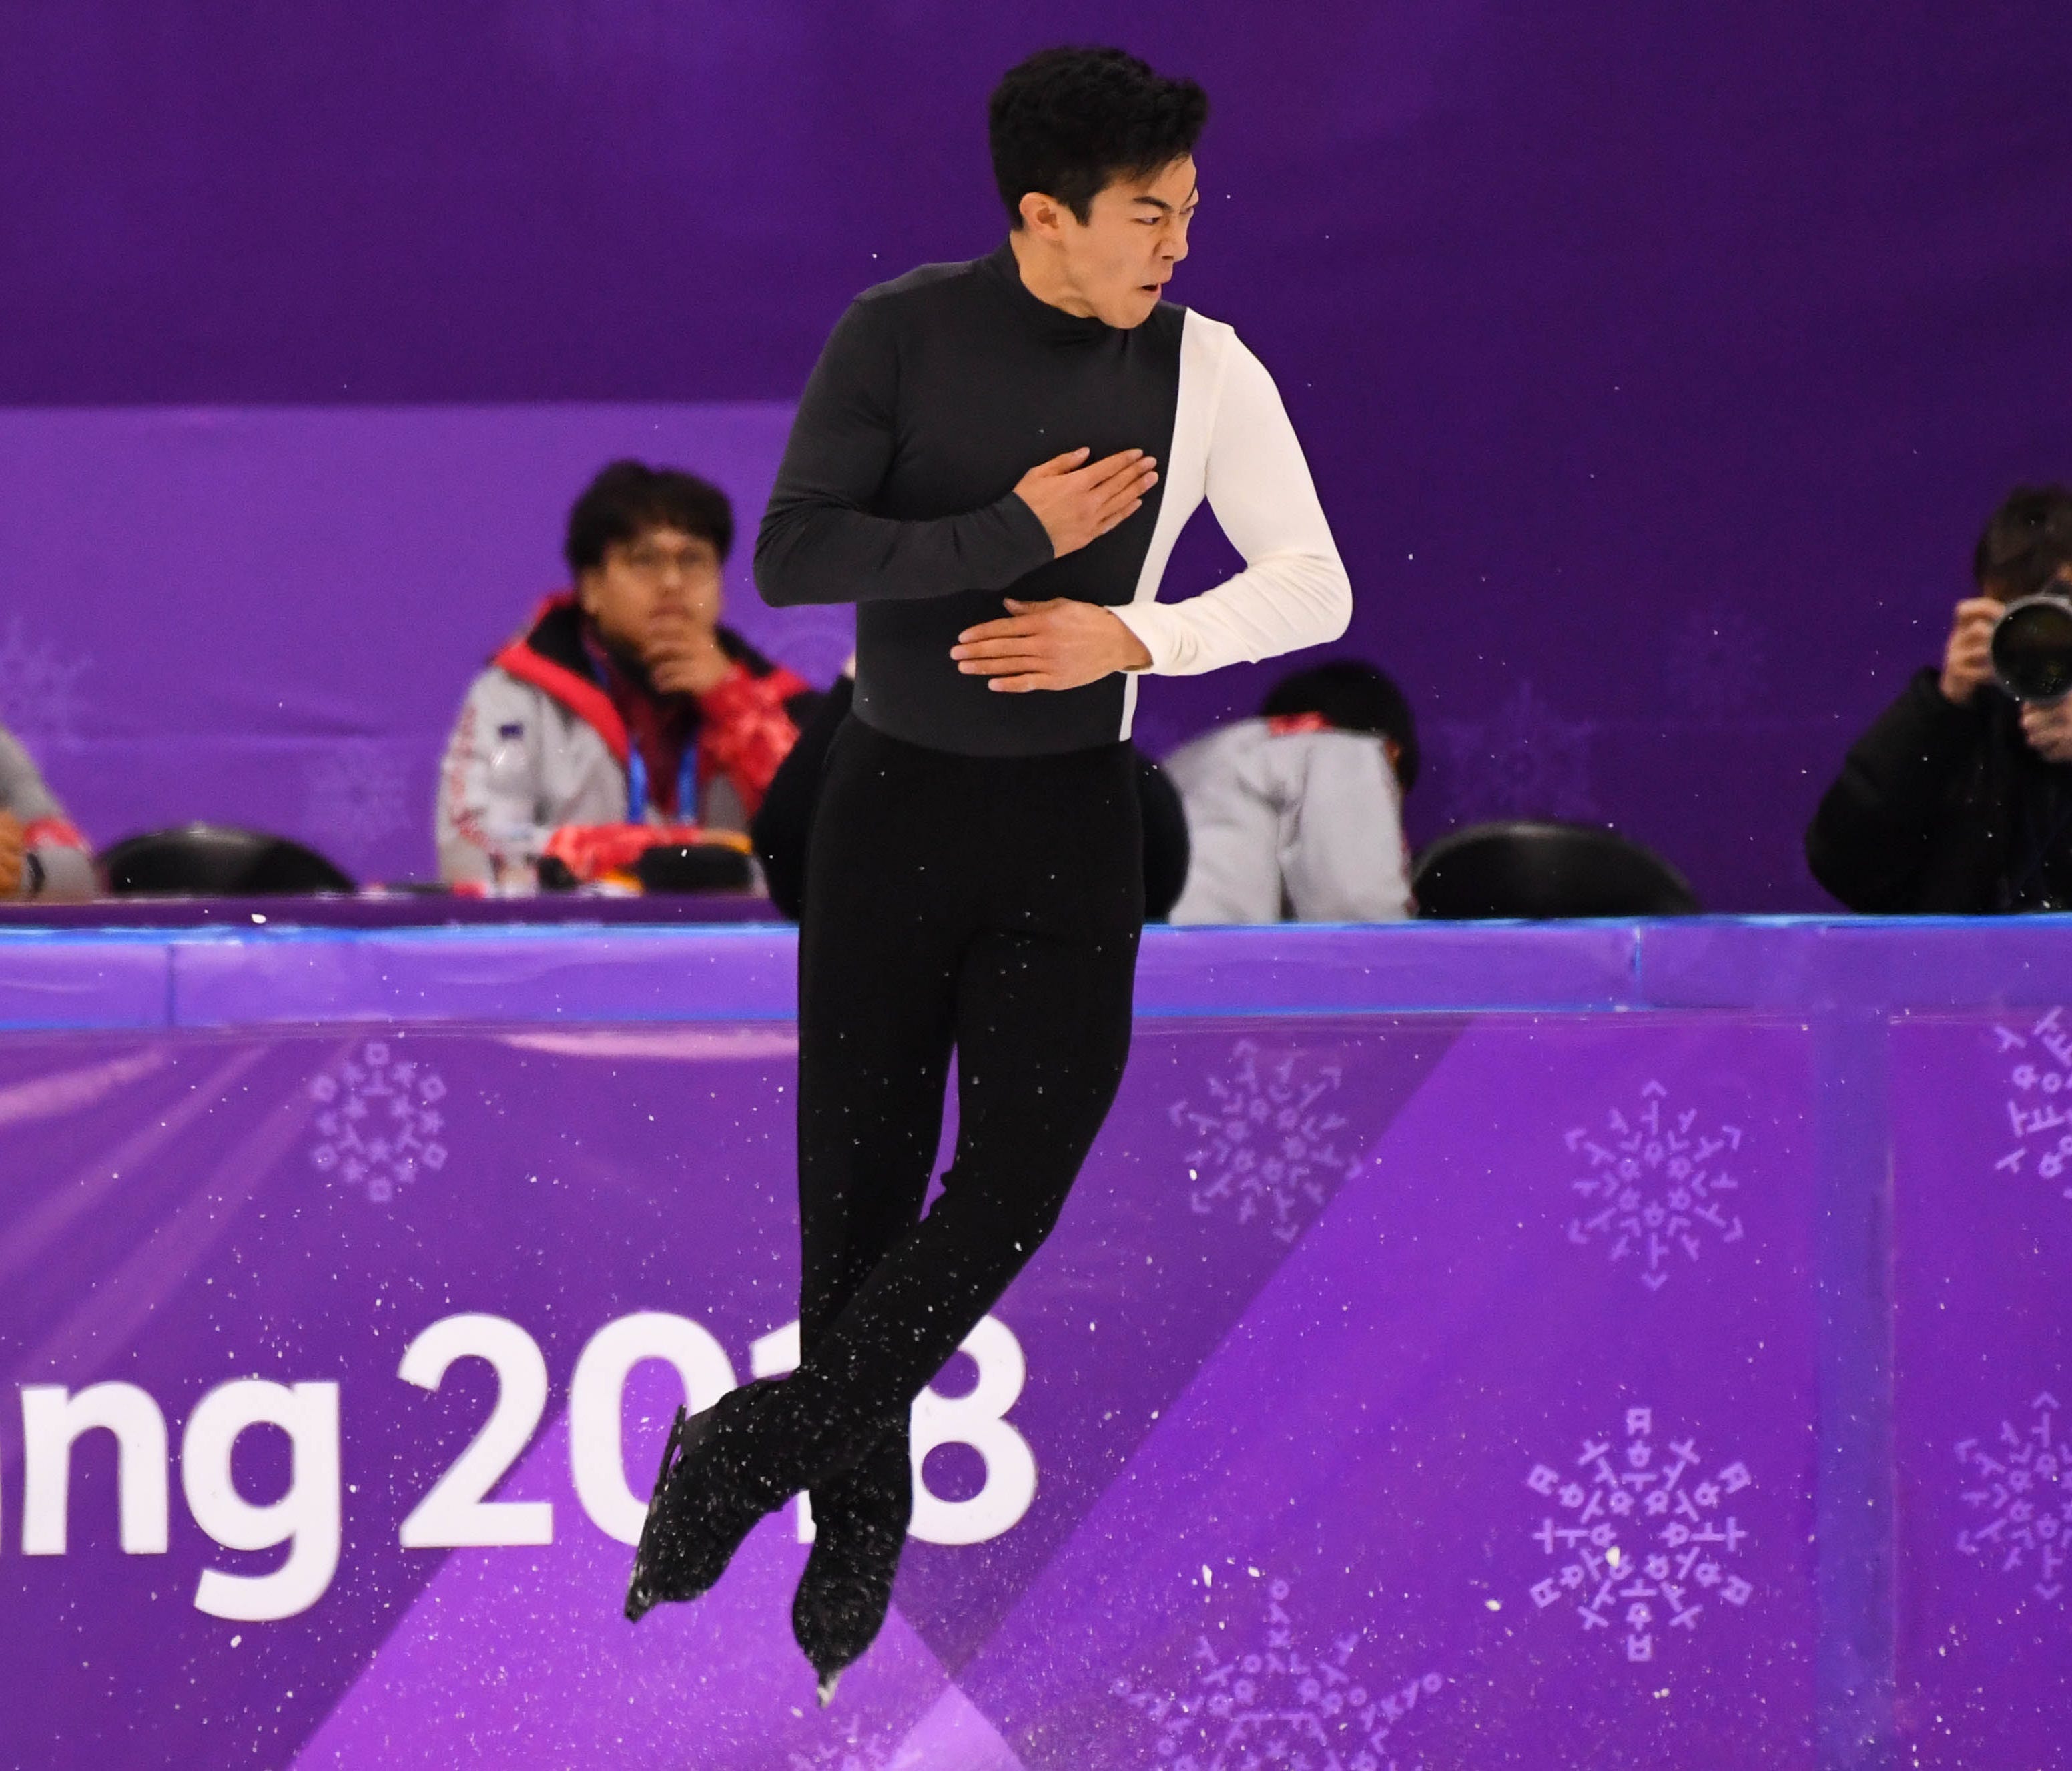 Nathan Chen (USA) competes in the men's figure skating short program during the Pyeongchang 2018 Olympic Winter Games at Gangneung Ice Arena on Feb. 16.